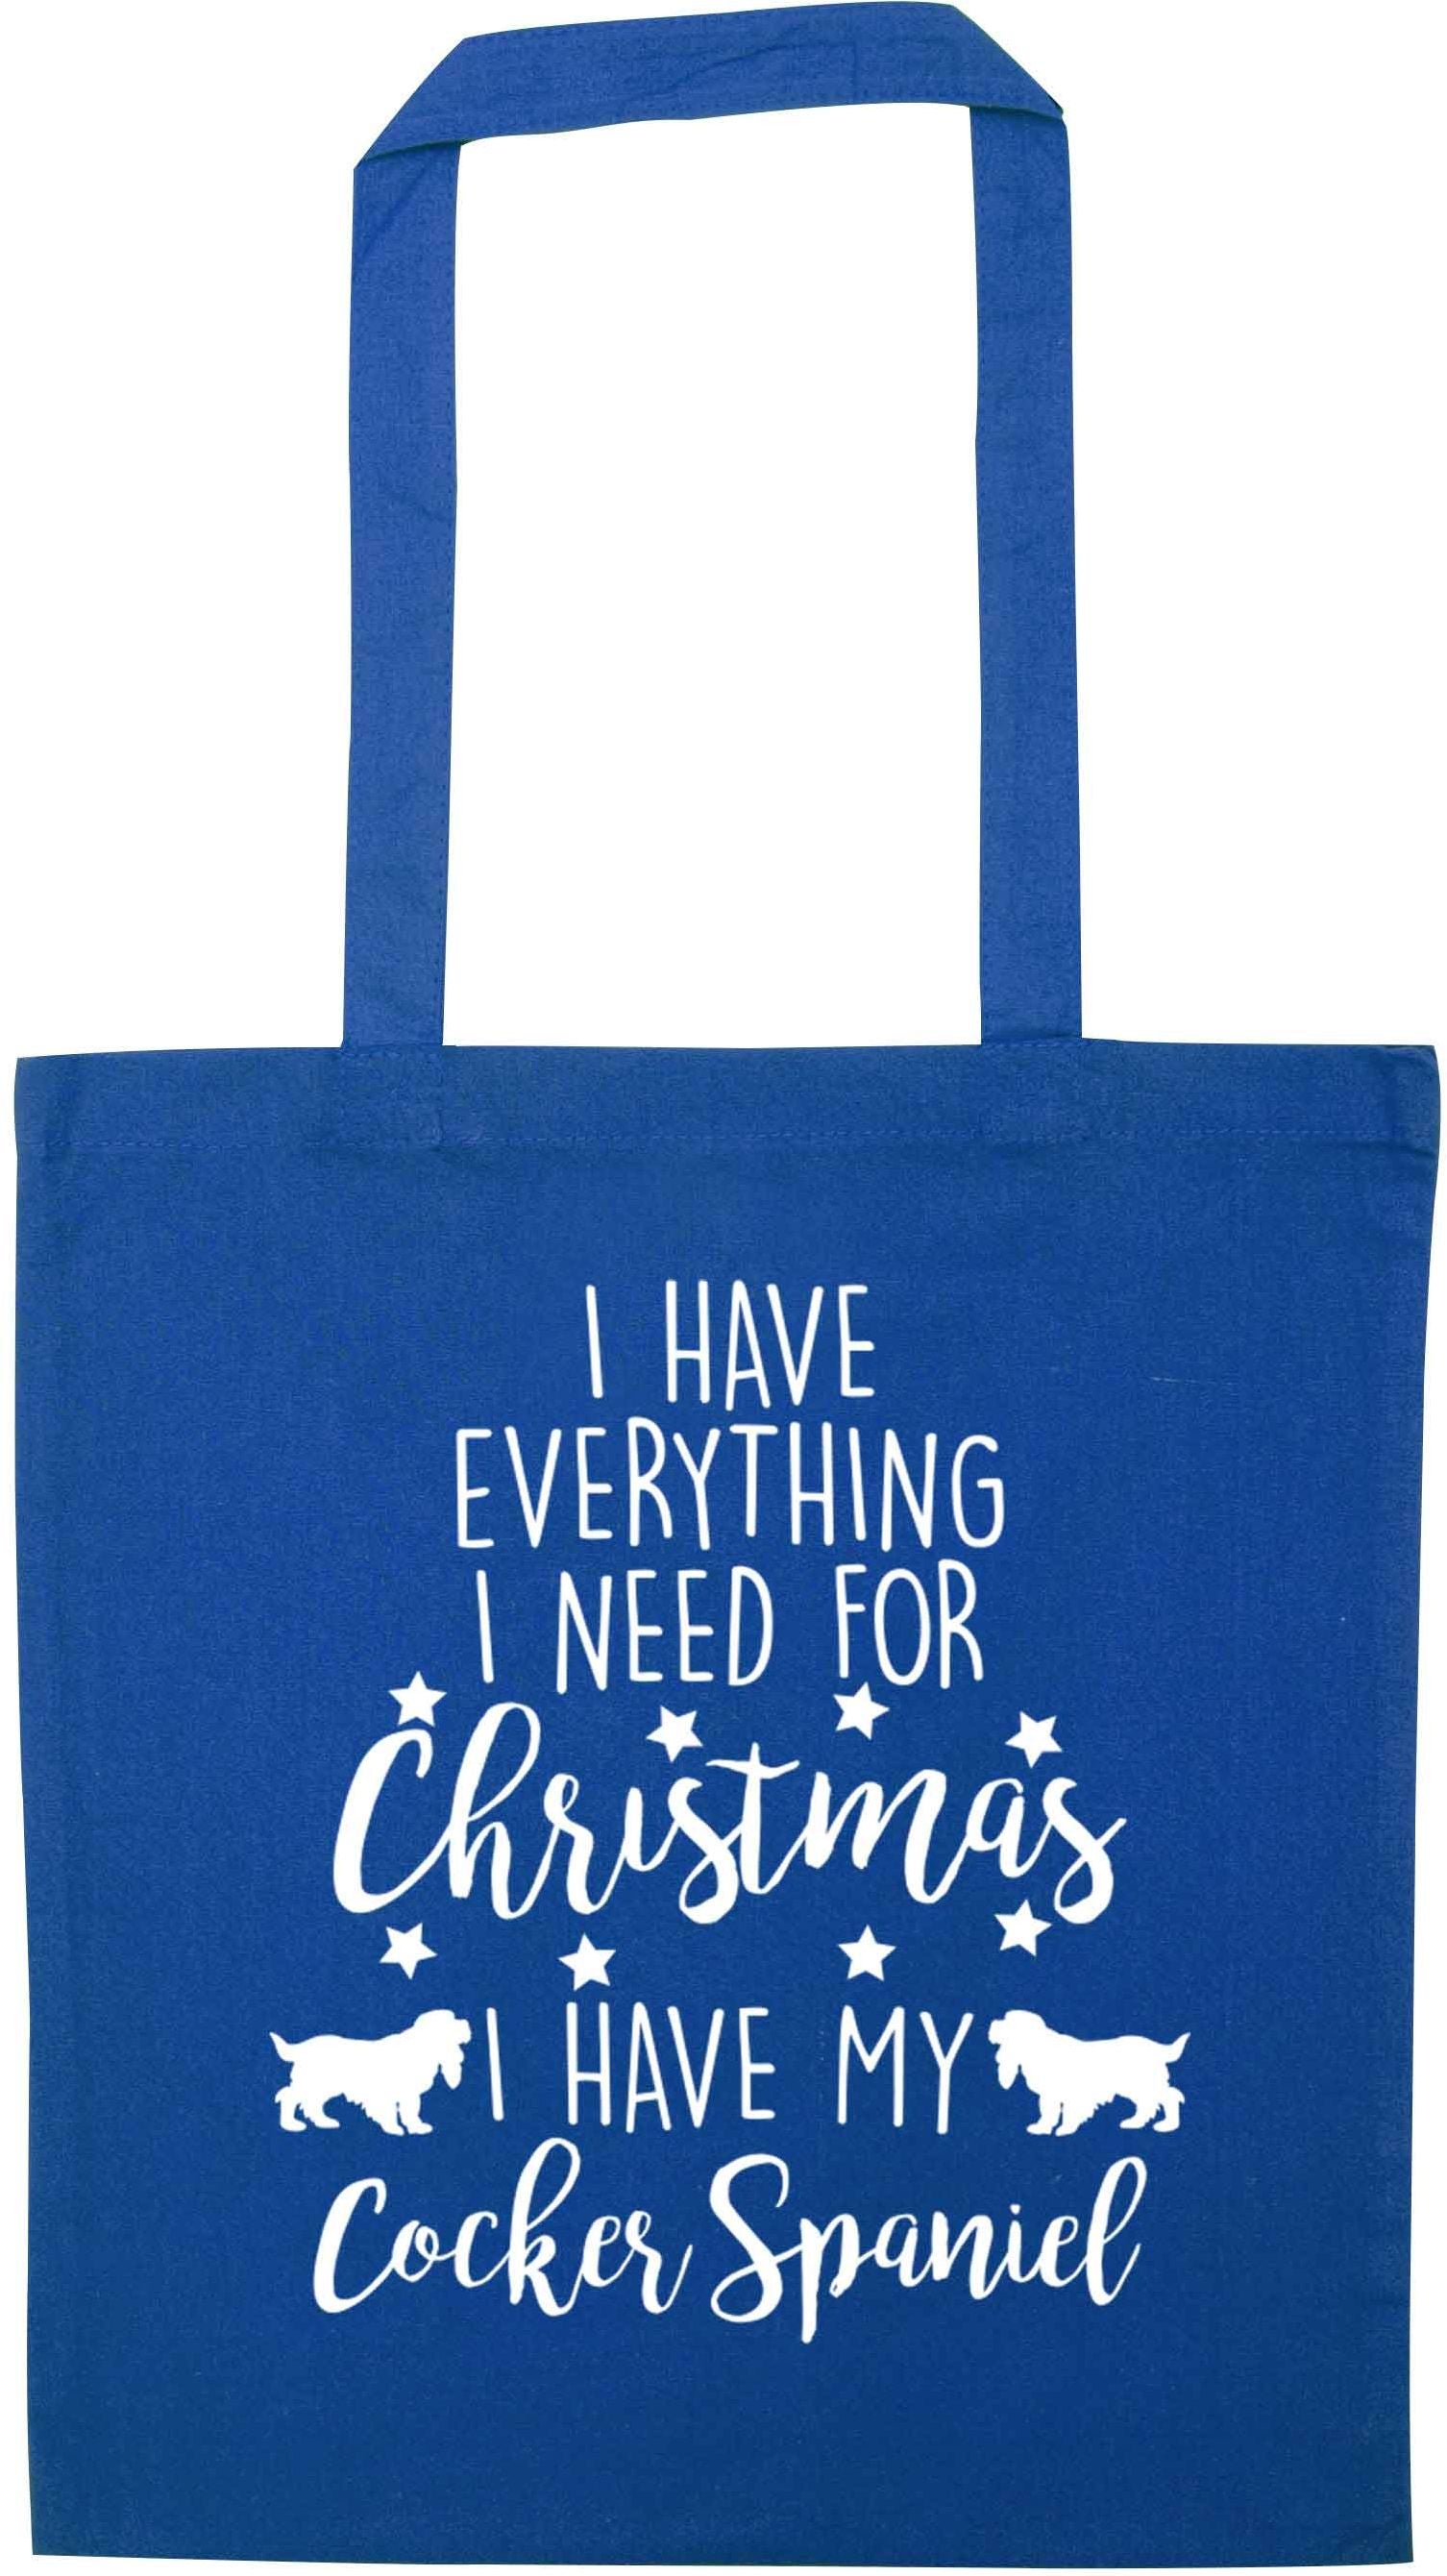 I have everything I need for Christmas I have my cocker spaniel blue tote bag